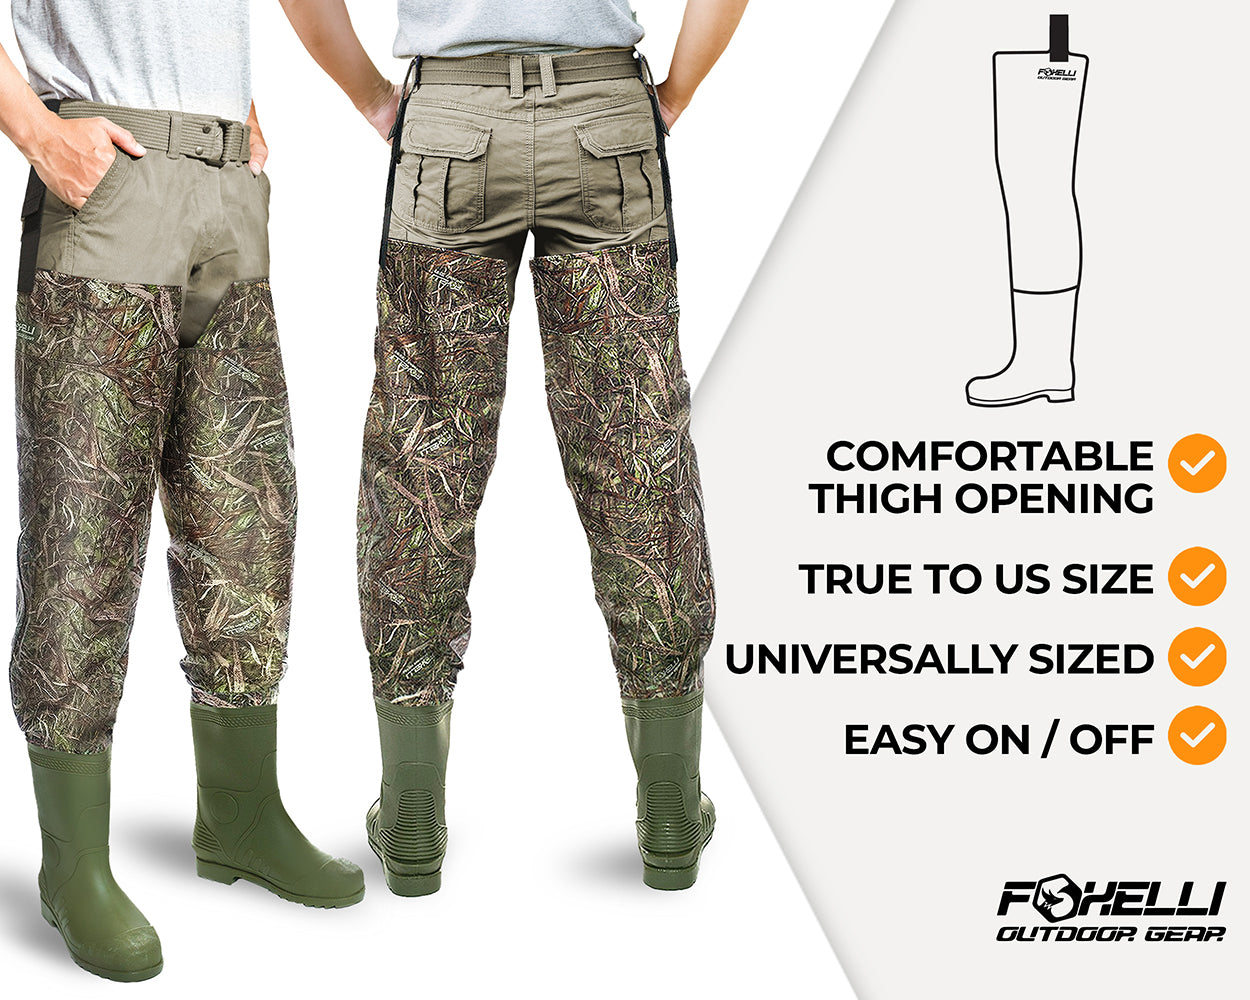 Foxelli Chest Waders – Camo Hunting & Fishing Waders for Men & Women with Boots, 2-Ply Nylon/PVC Waterproof Bootfoot Waders